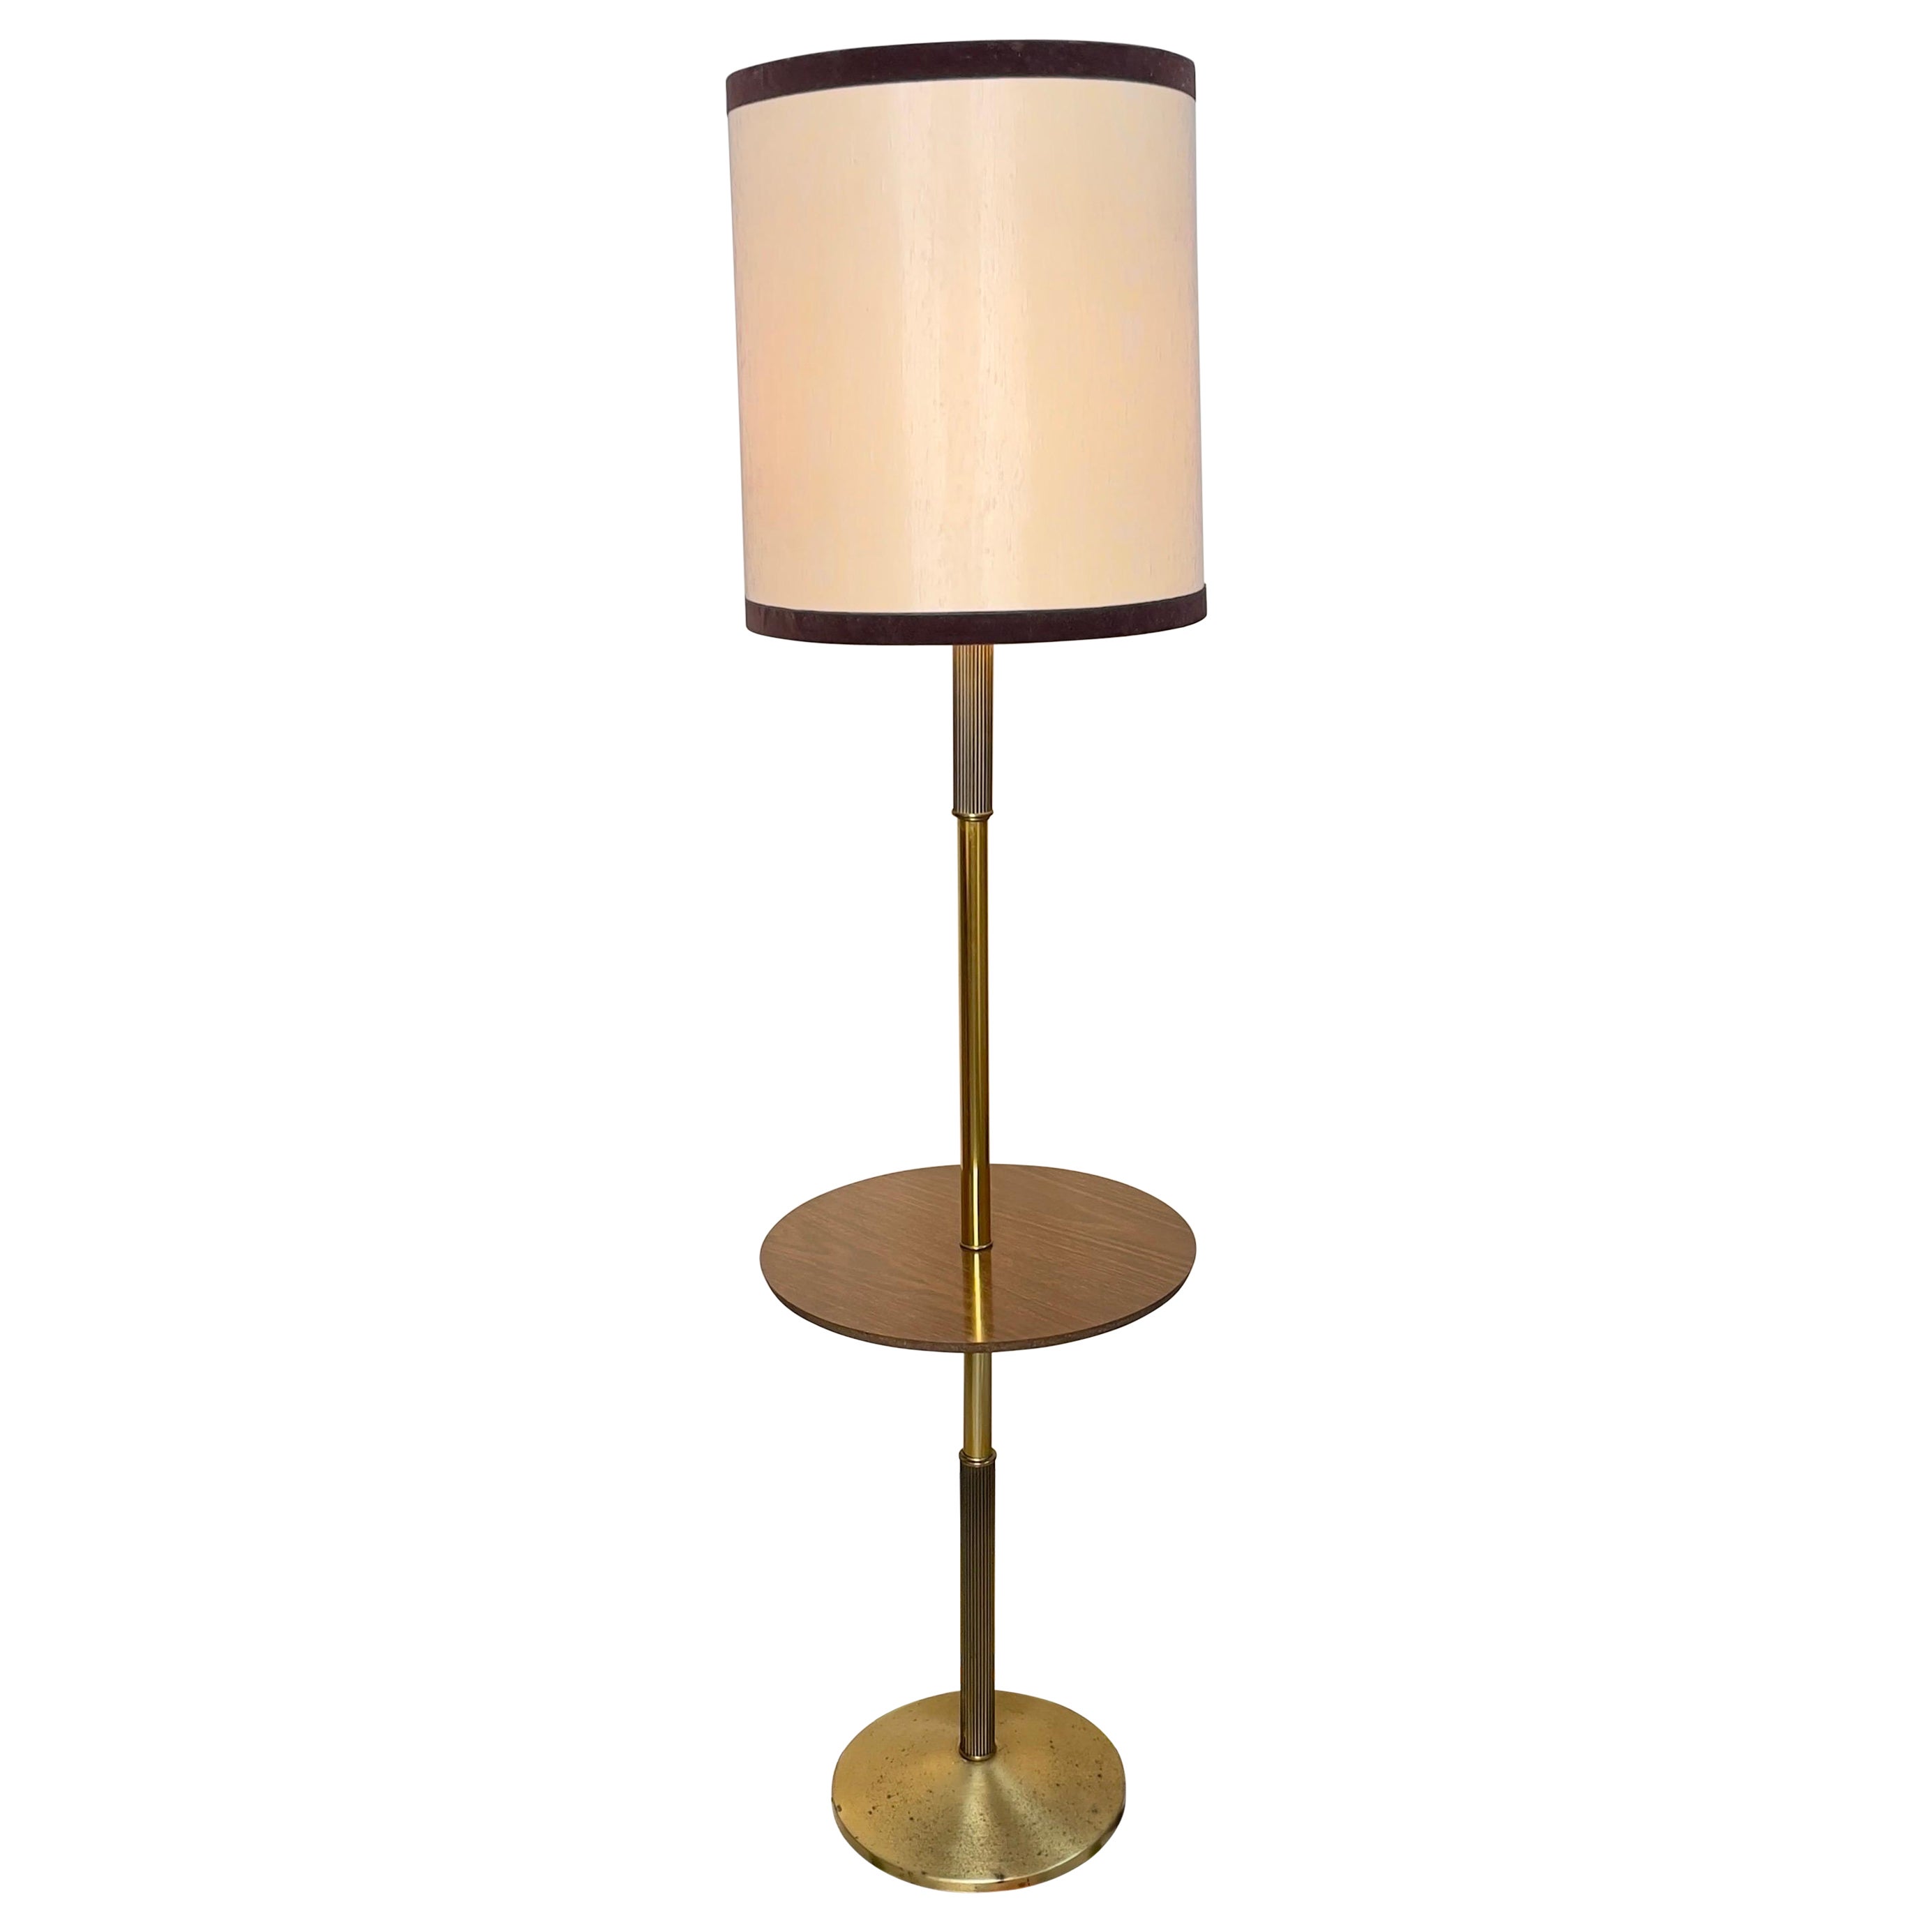 Mid 20th Century Modern Floor Lamp With Table and Lampshade For Sale